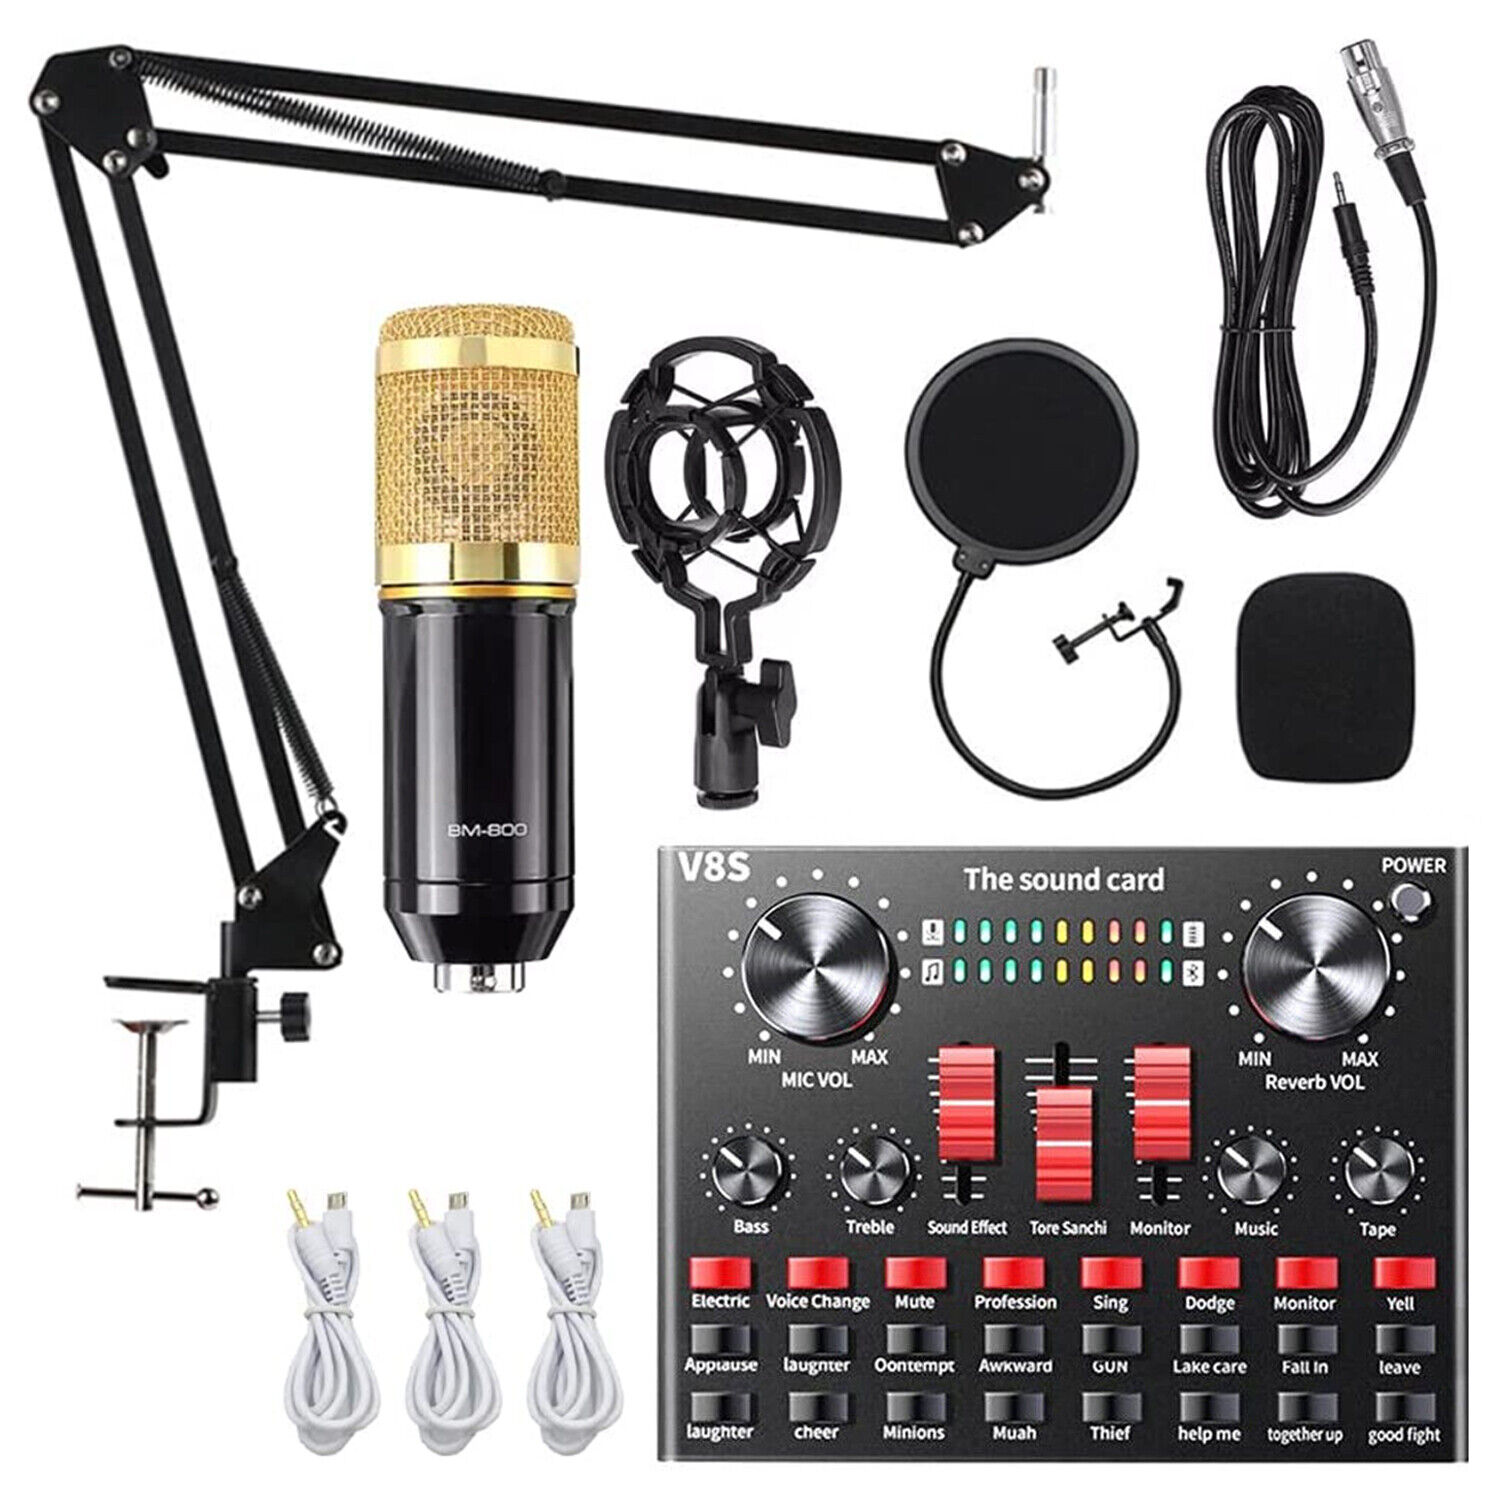 Complete Home Studio Recording Kit - Mixer, Condenser Mic For Pc Music/Podcast